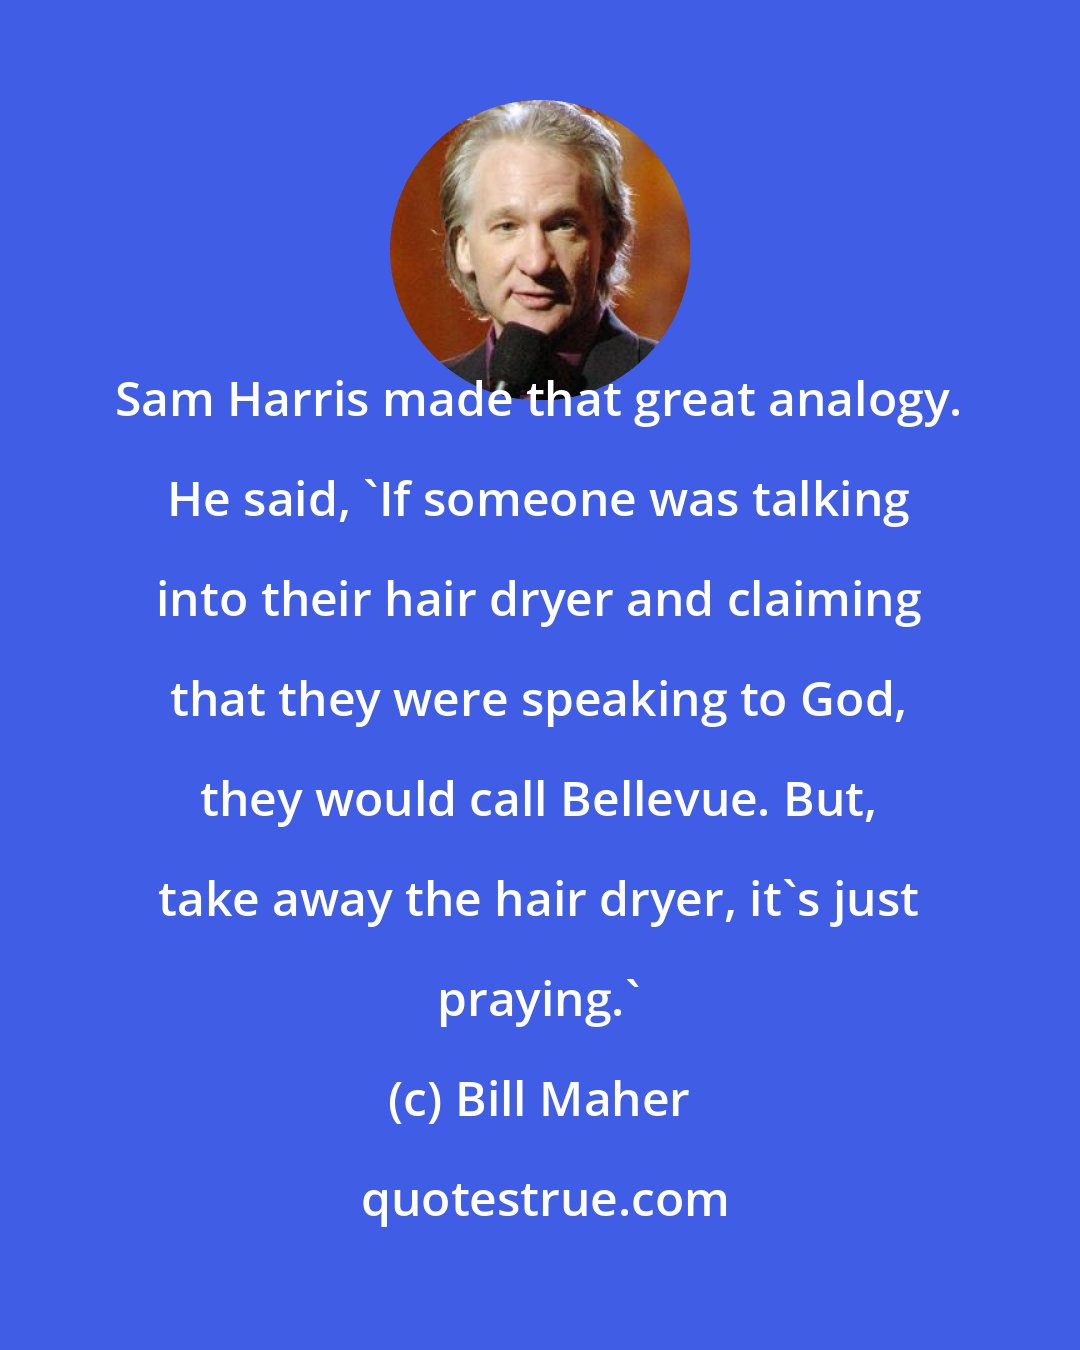 Bill Maher: Sam Harris made that great analogy. He said, 'If someone was talking into their hair dryer and claiming that they were speaking to God, they would call Bellevue. But, take away the hair dryer, it's just praying.'